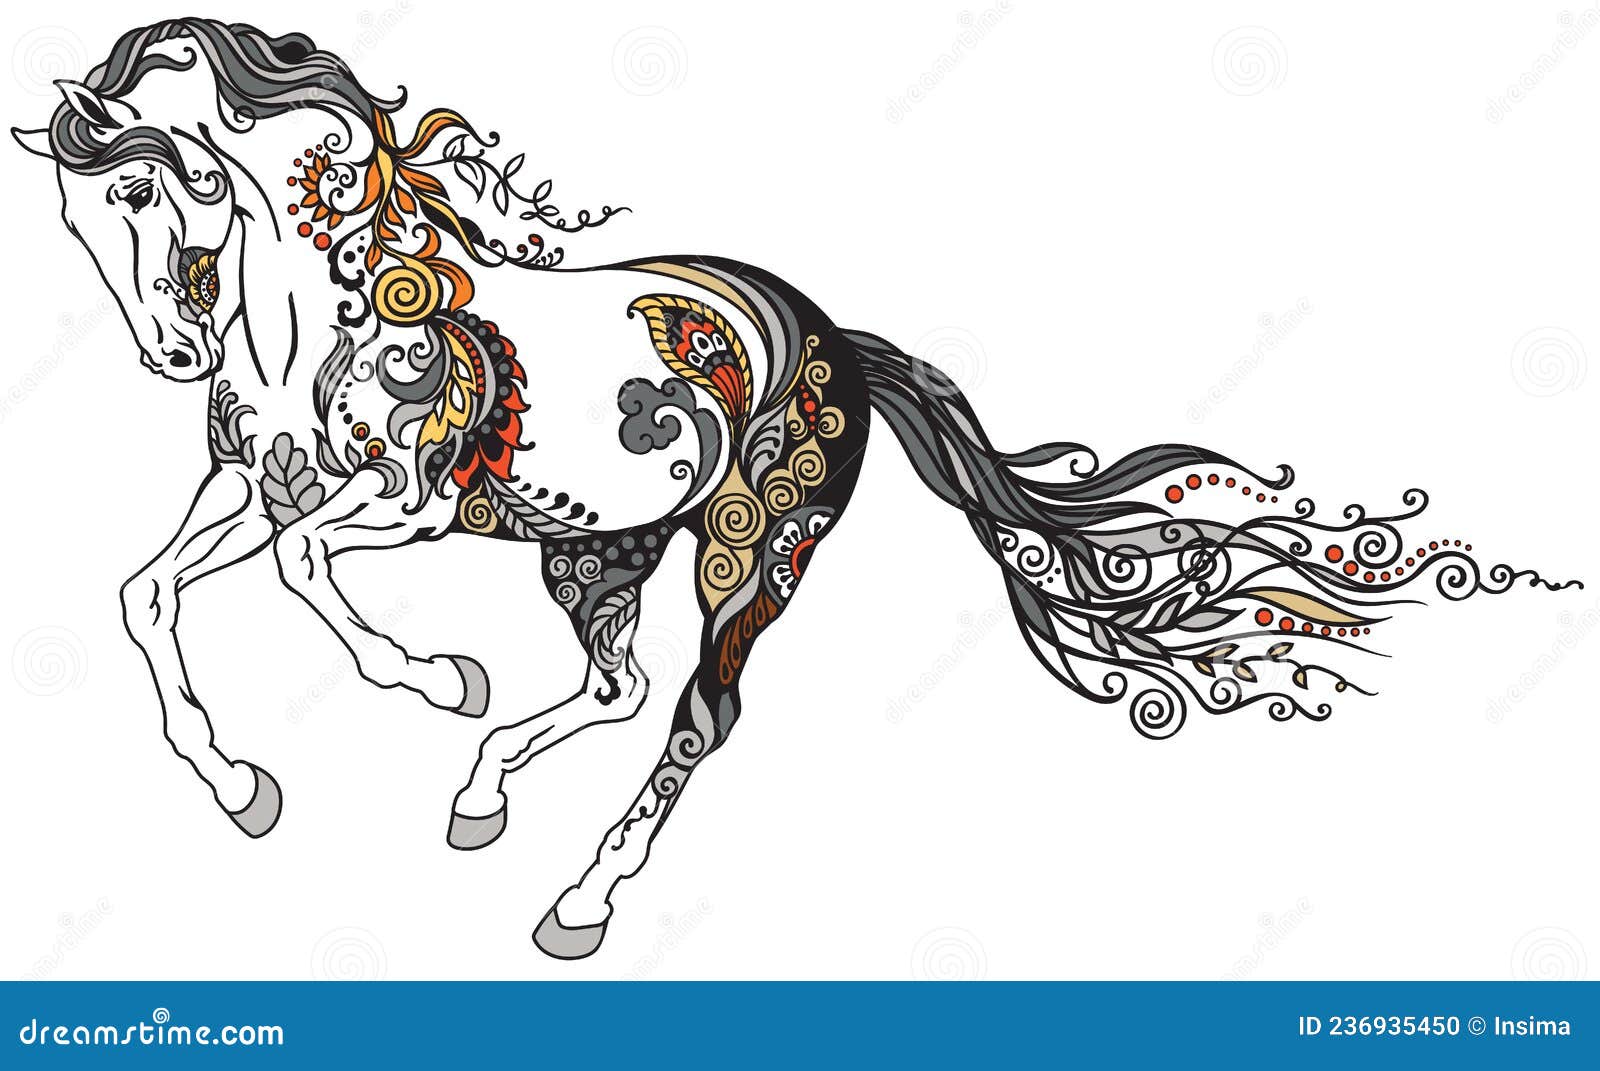 Premium Vector  Vector silhouette of a running horse beautiful horse  vector sketch illustration